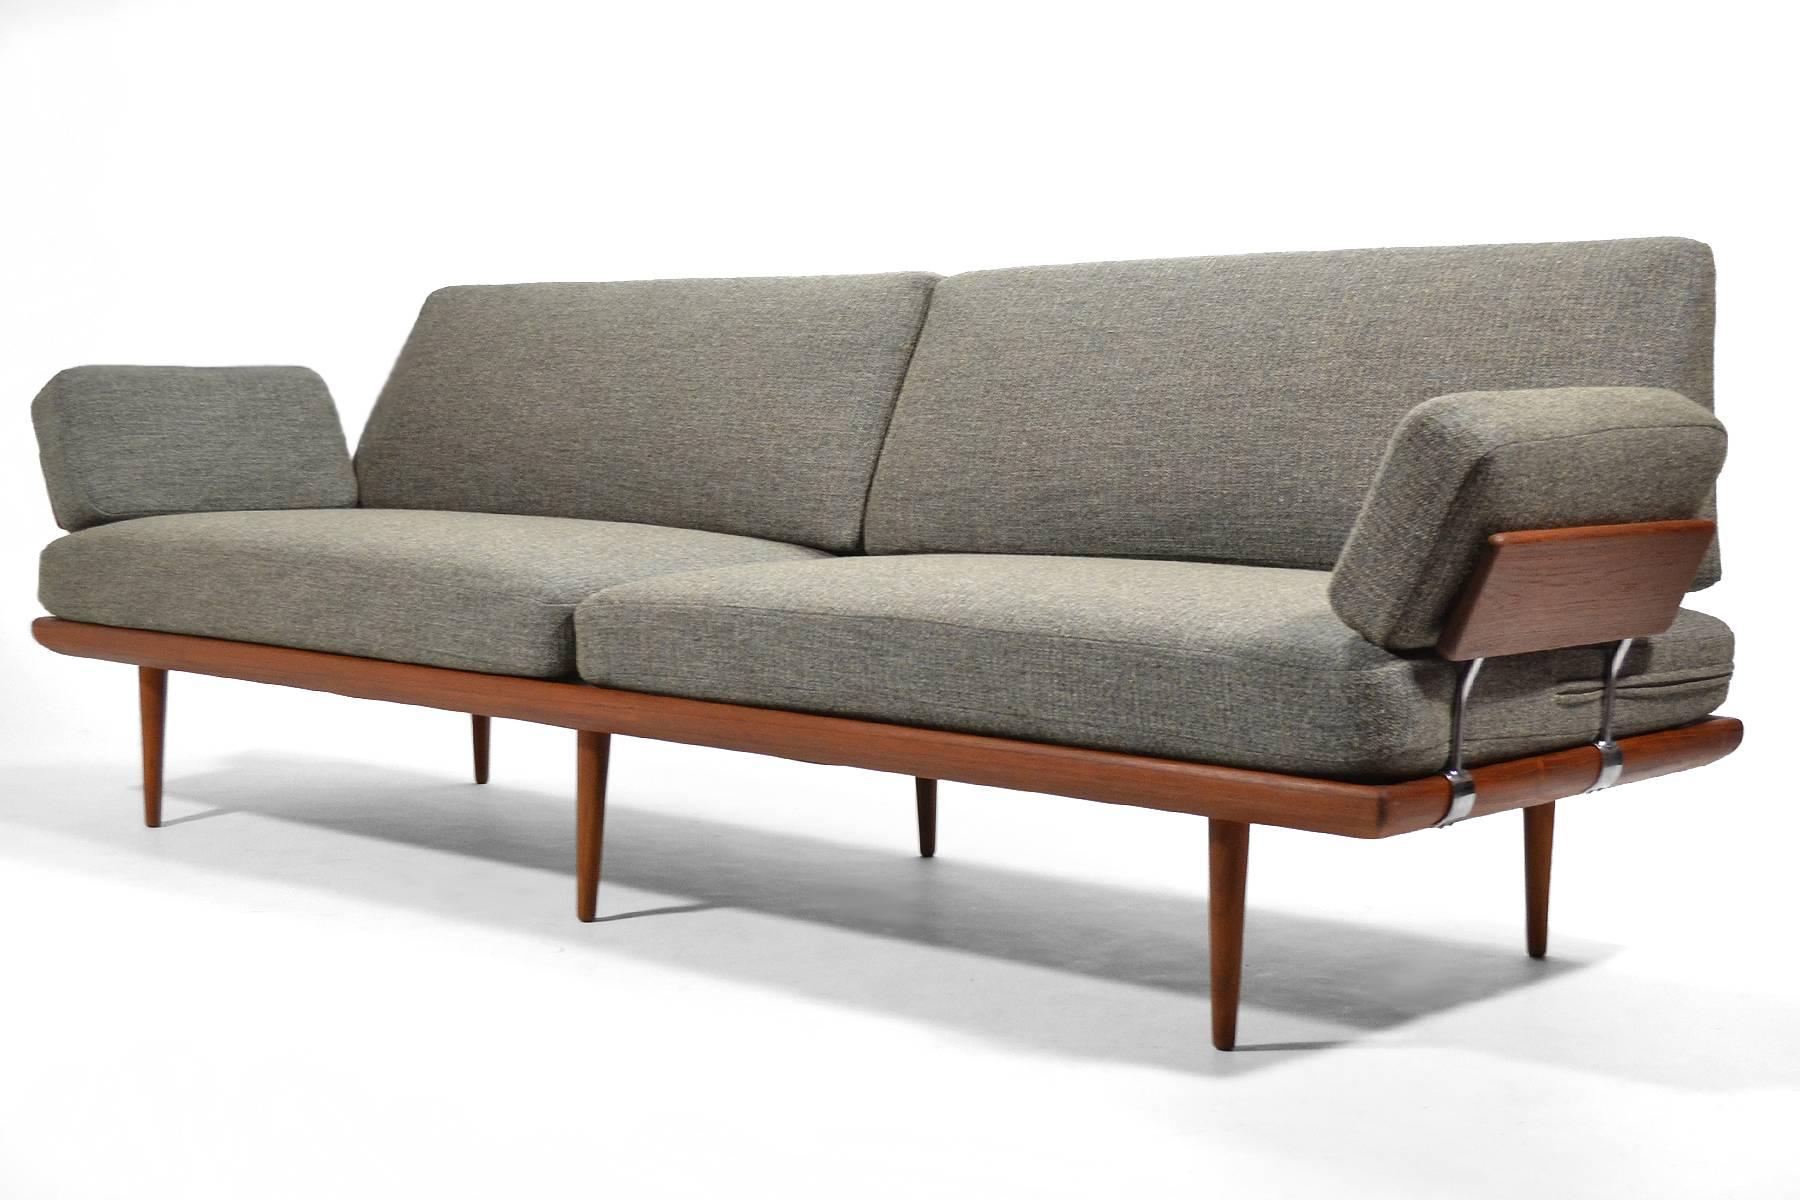 Finely crafted by France & Søn, this rare, extra large version of the Minerva sofa or daybed has a frame of solid teak with steel fittings and comfortable spring cushions which have just been upholstered in a richly textured gray fabric. 

A